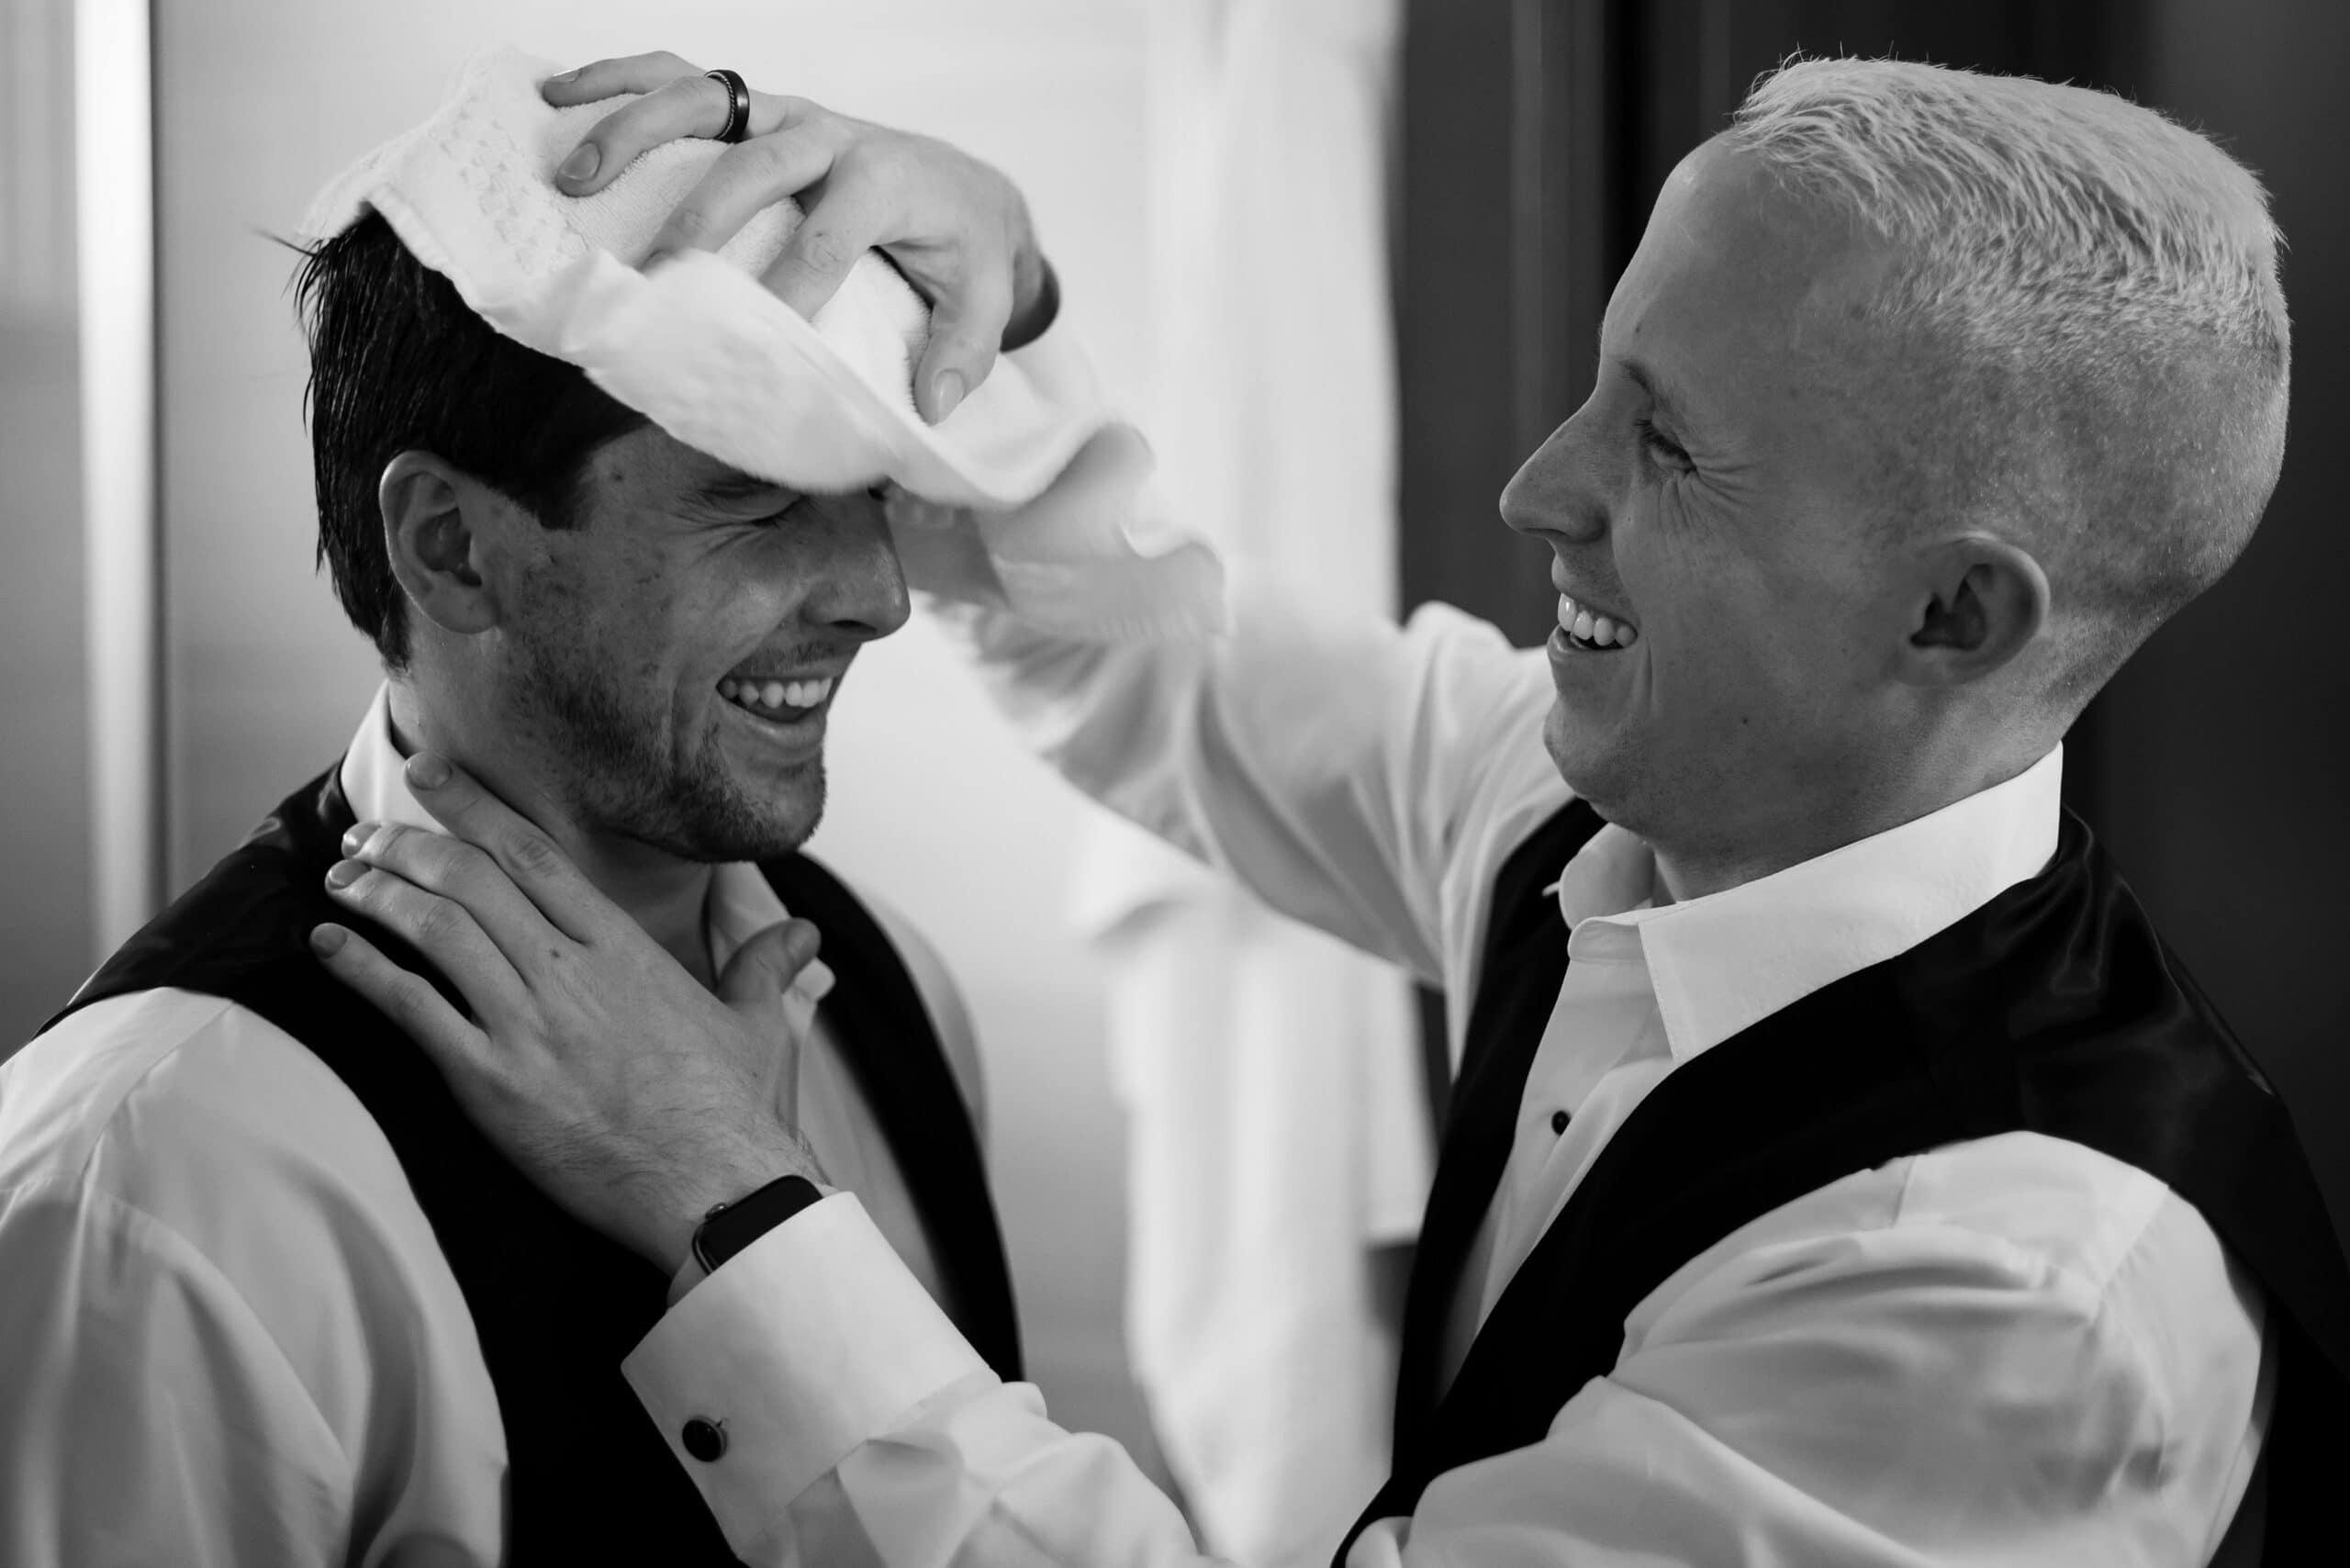 The groom gets help with his hair on the wedding day